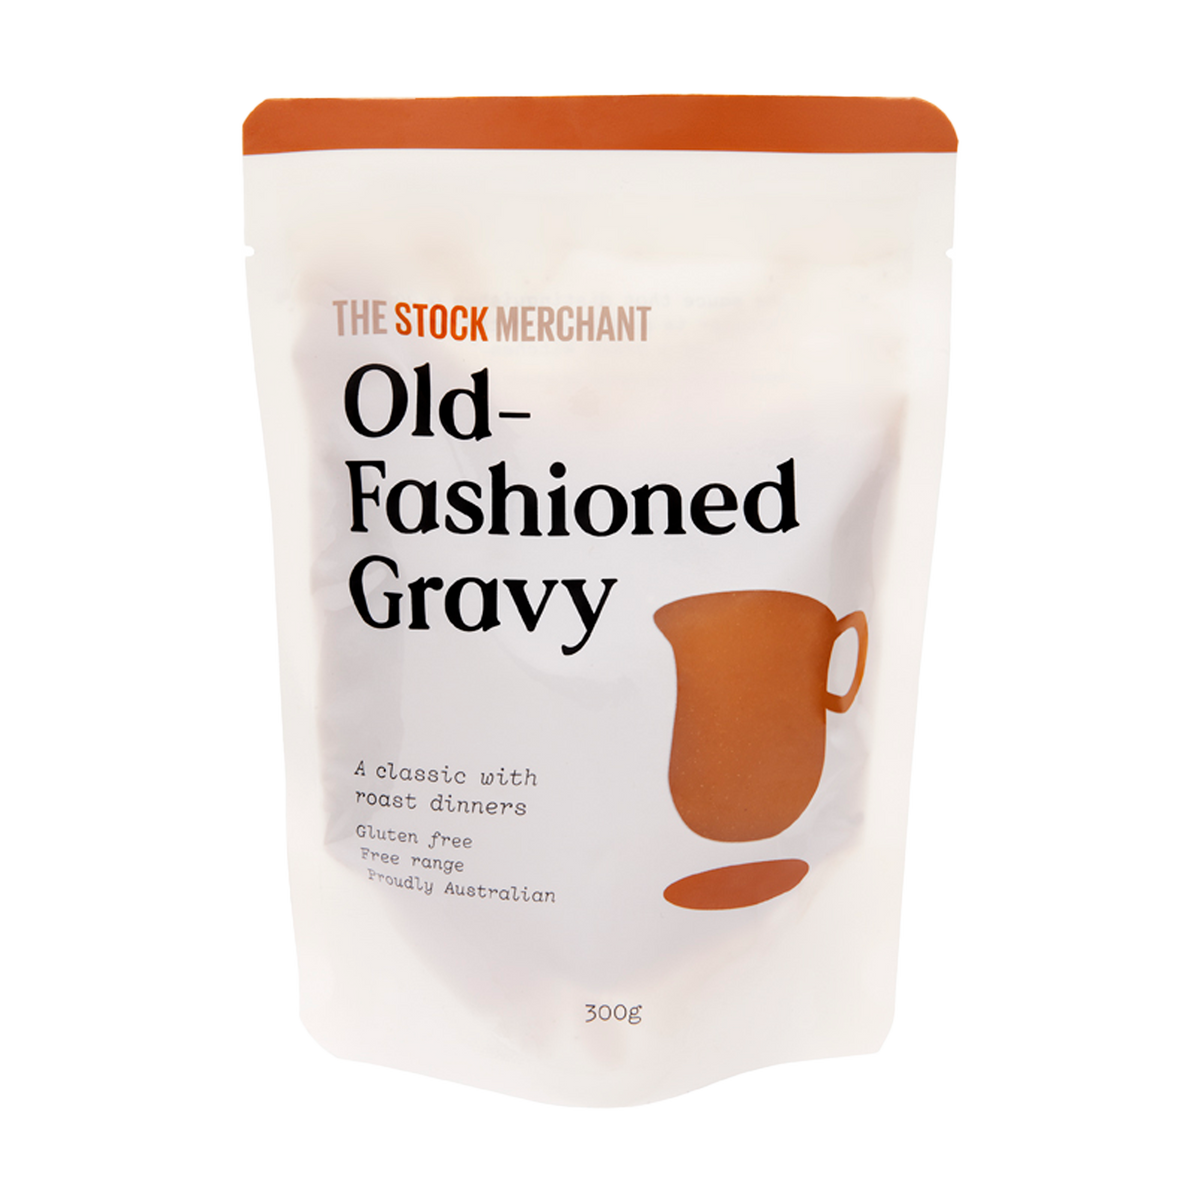 All-Natural Old-Fashioned Gravy Sauce from Australia (300g) - Horizon Farms